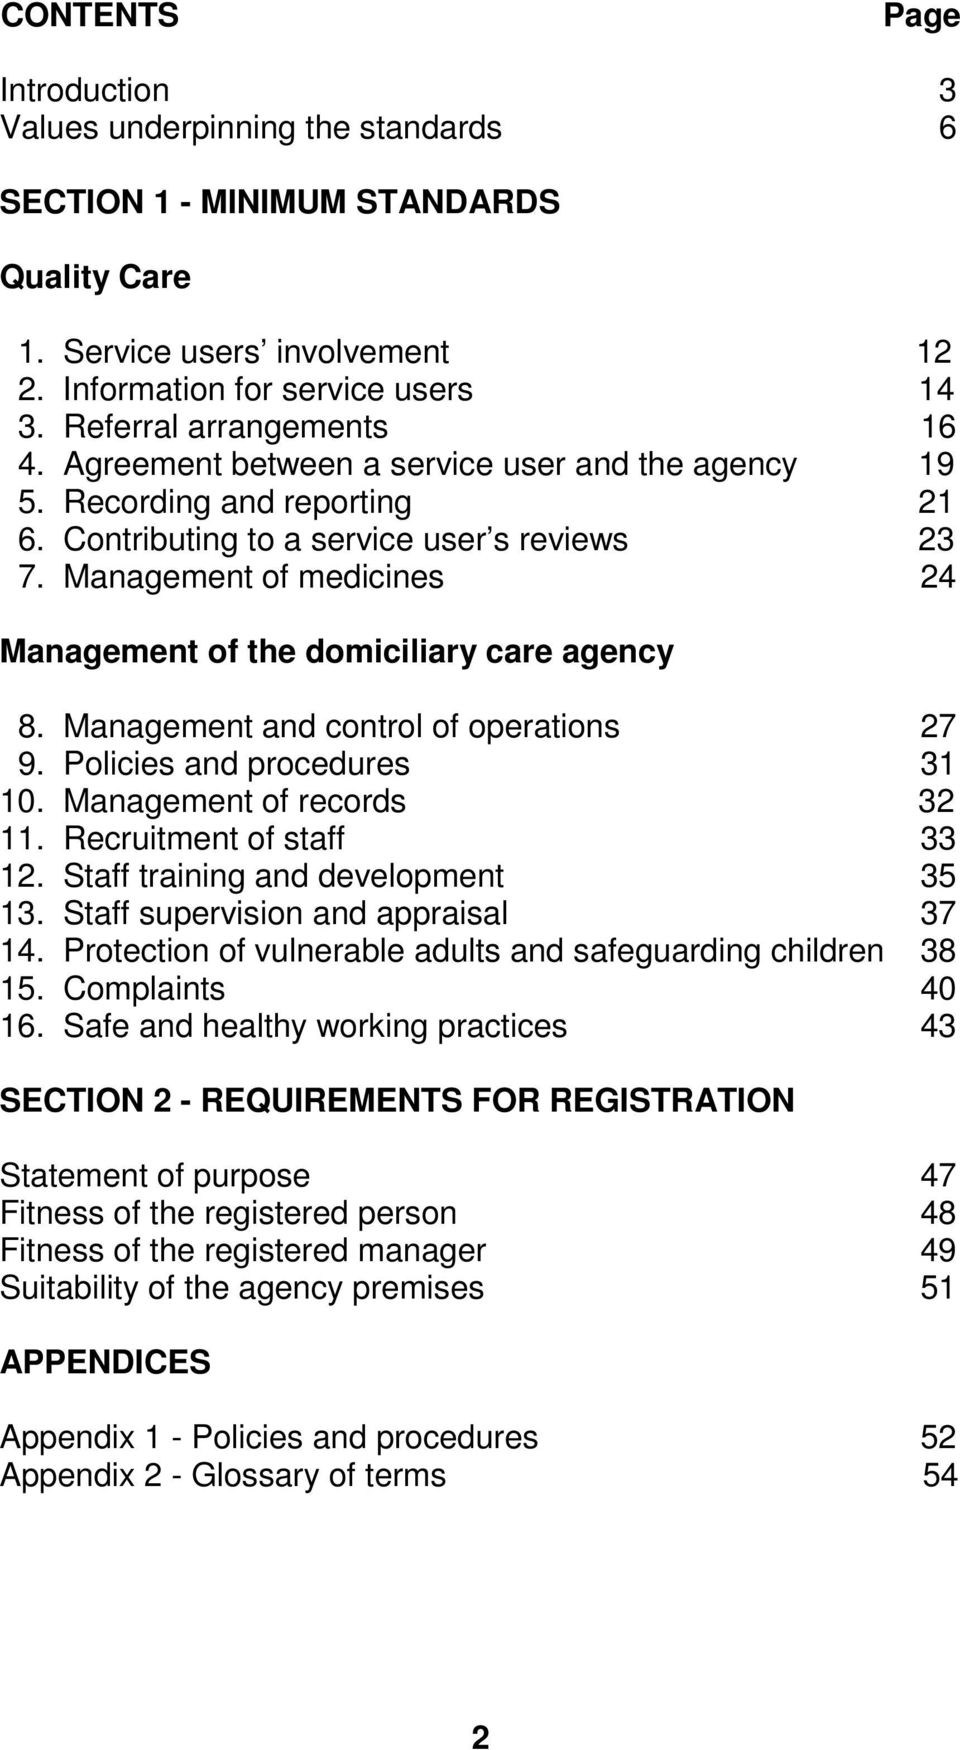 Management of medicines 24 Management of the domiciliary care agency 8. Management and control of operations 27 9. Policies and procedures 31 10. Management of records 32 11.